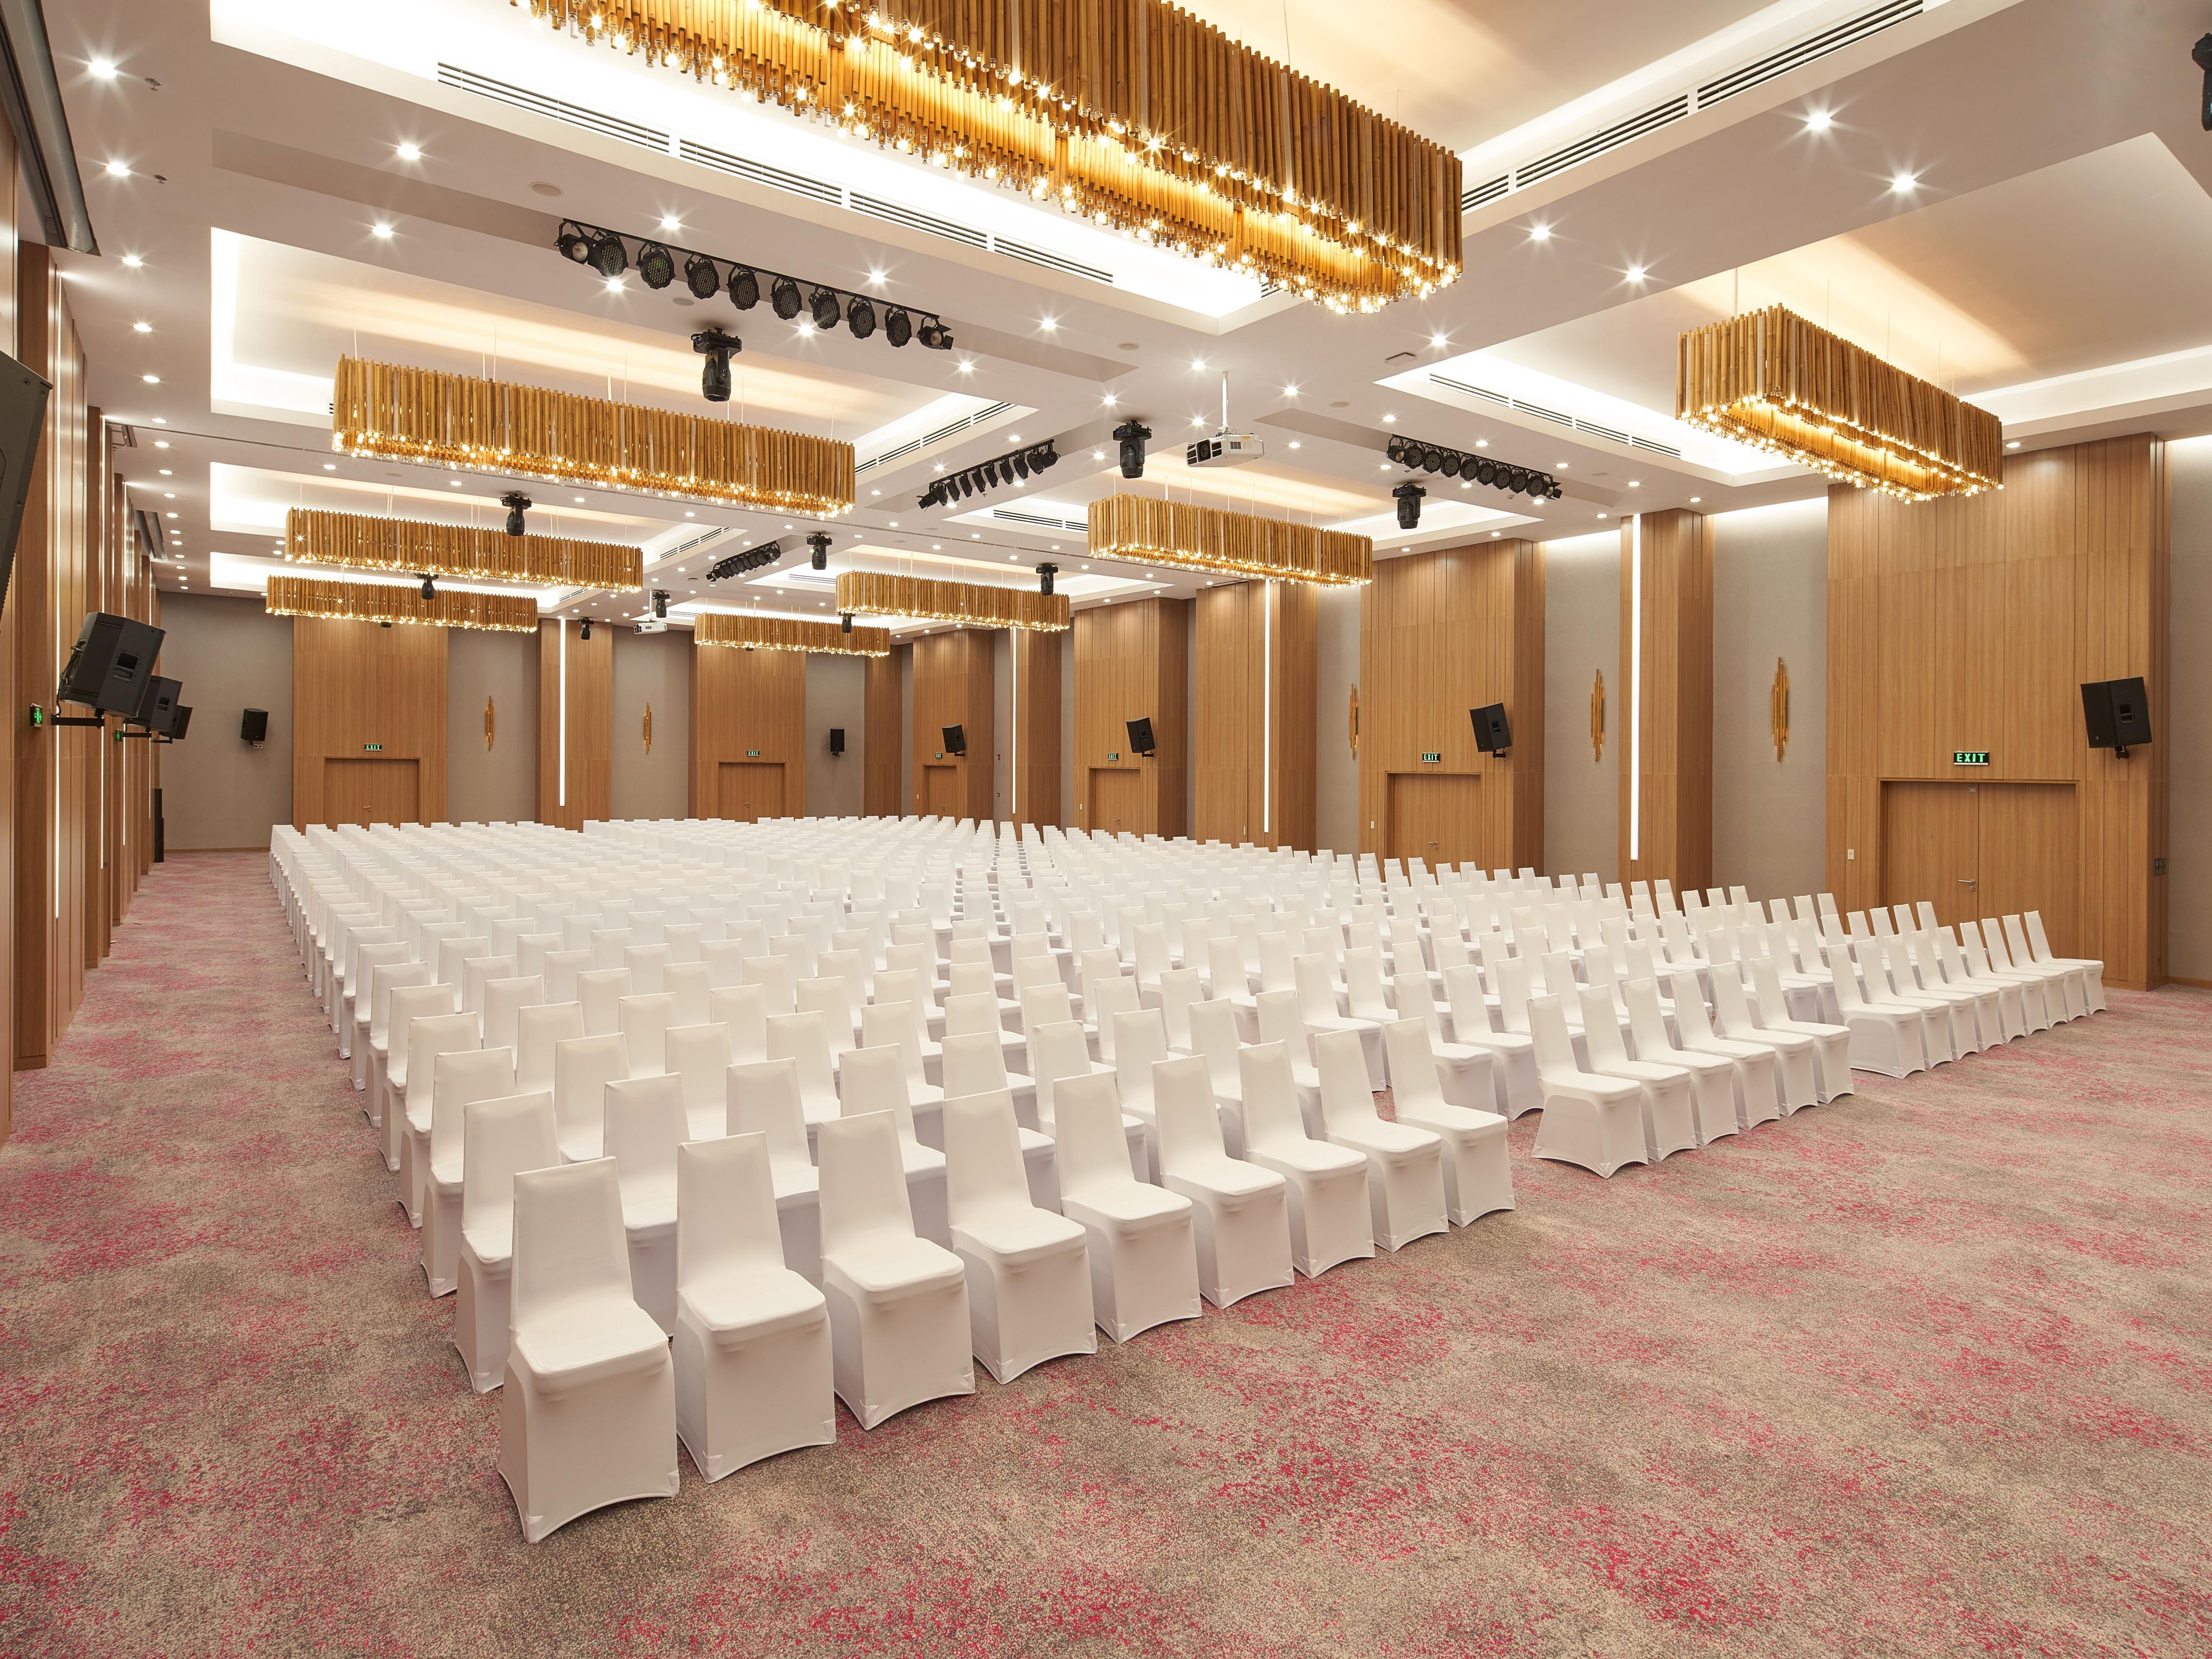 With 01 grand Song Saigon Ballroom that can host up to 710 guests in a theater setup and 05 function rooms in which 04 can combine into one larger room, our function spaces offer flexibility as to event setup regardless of event themes and requirements.